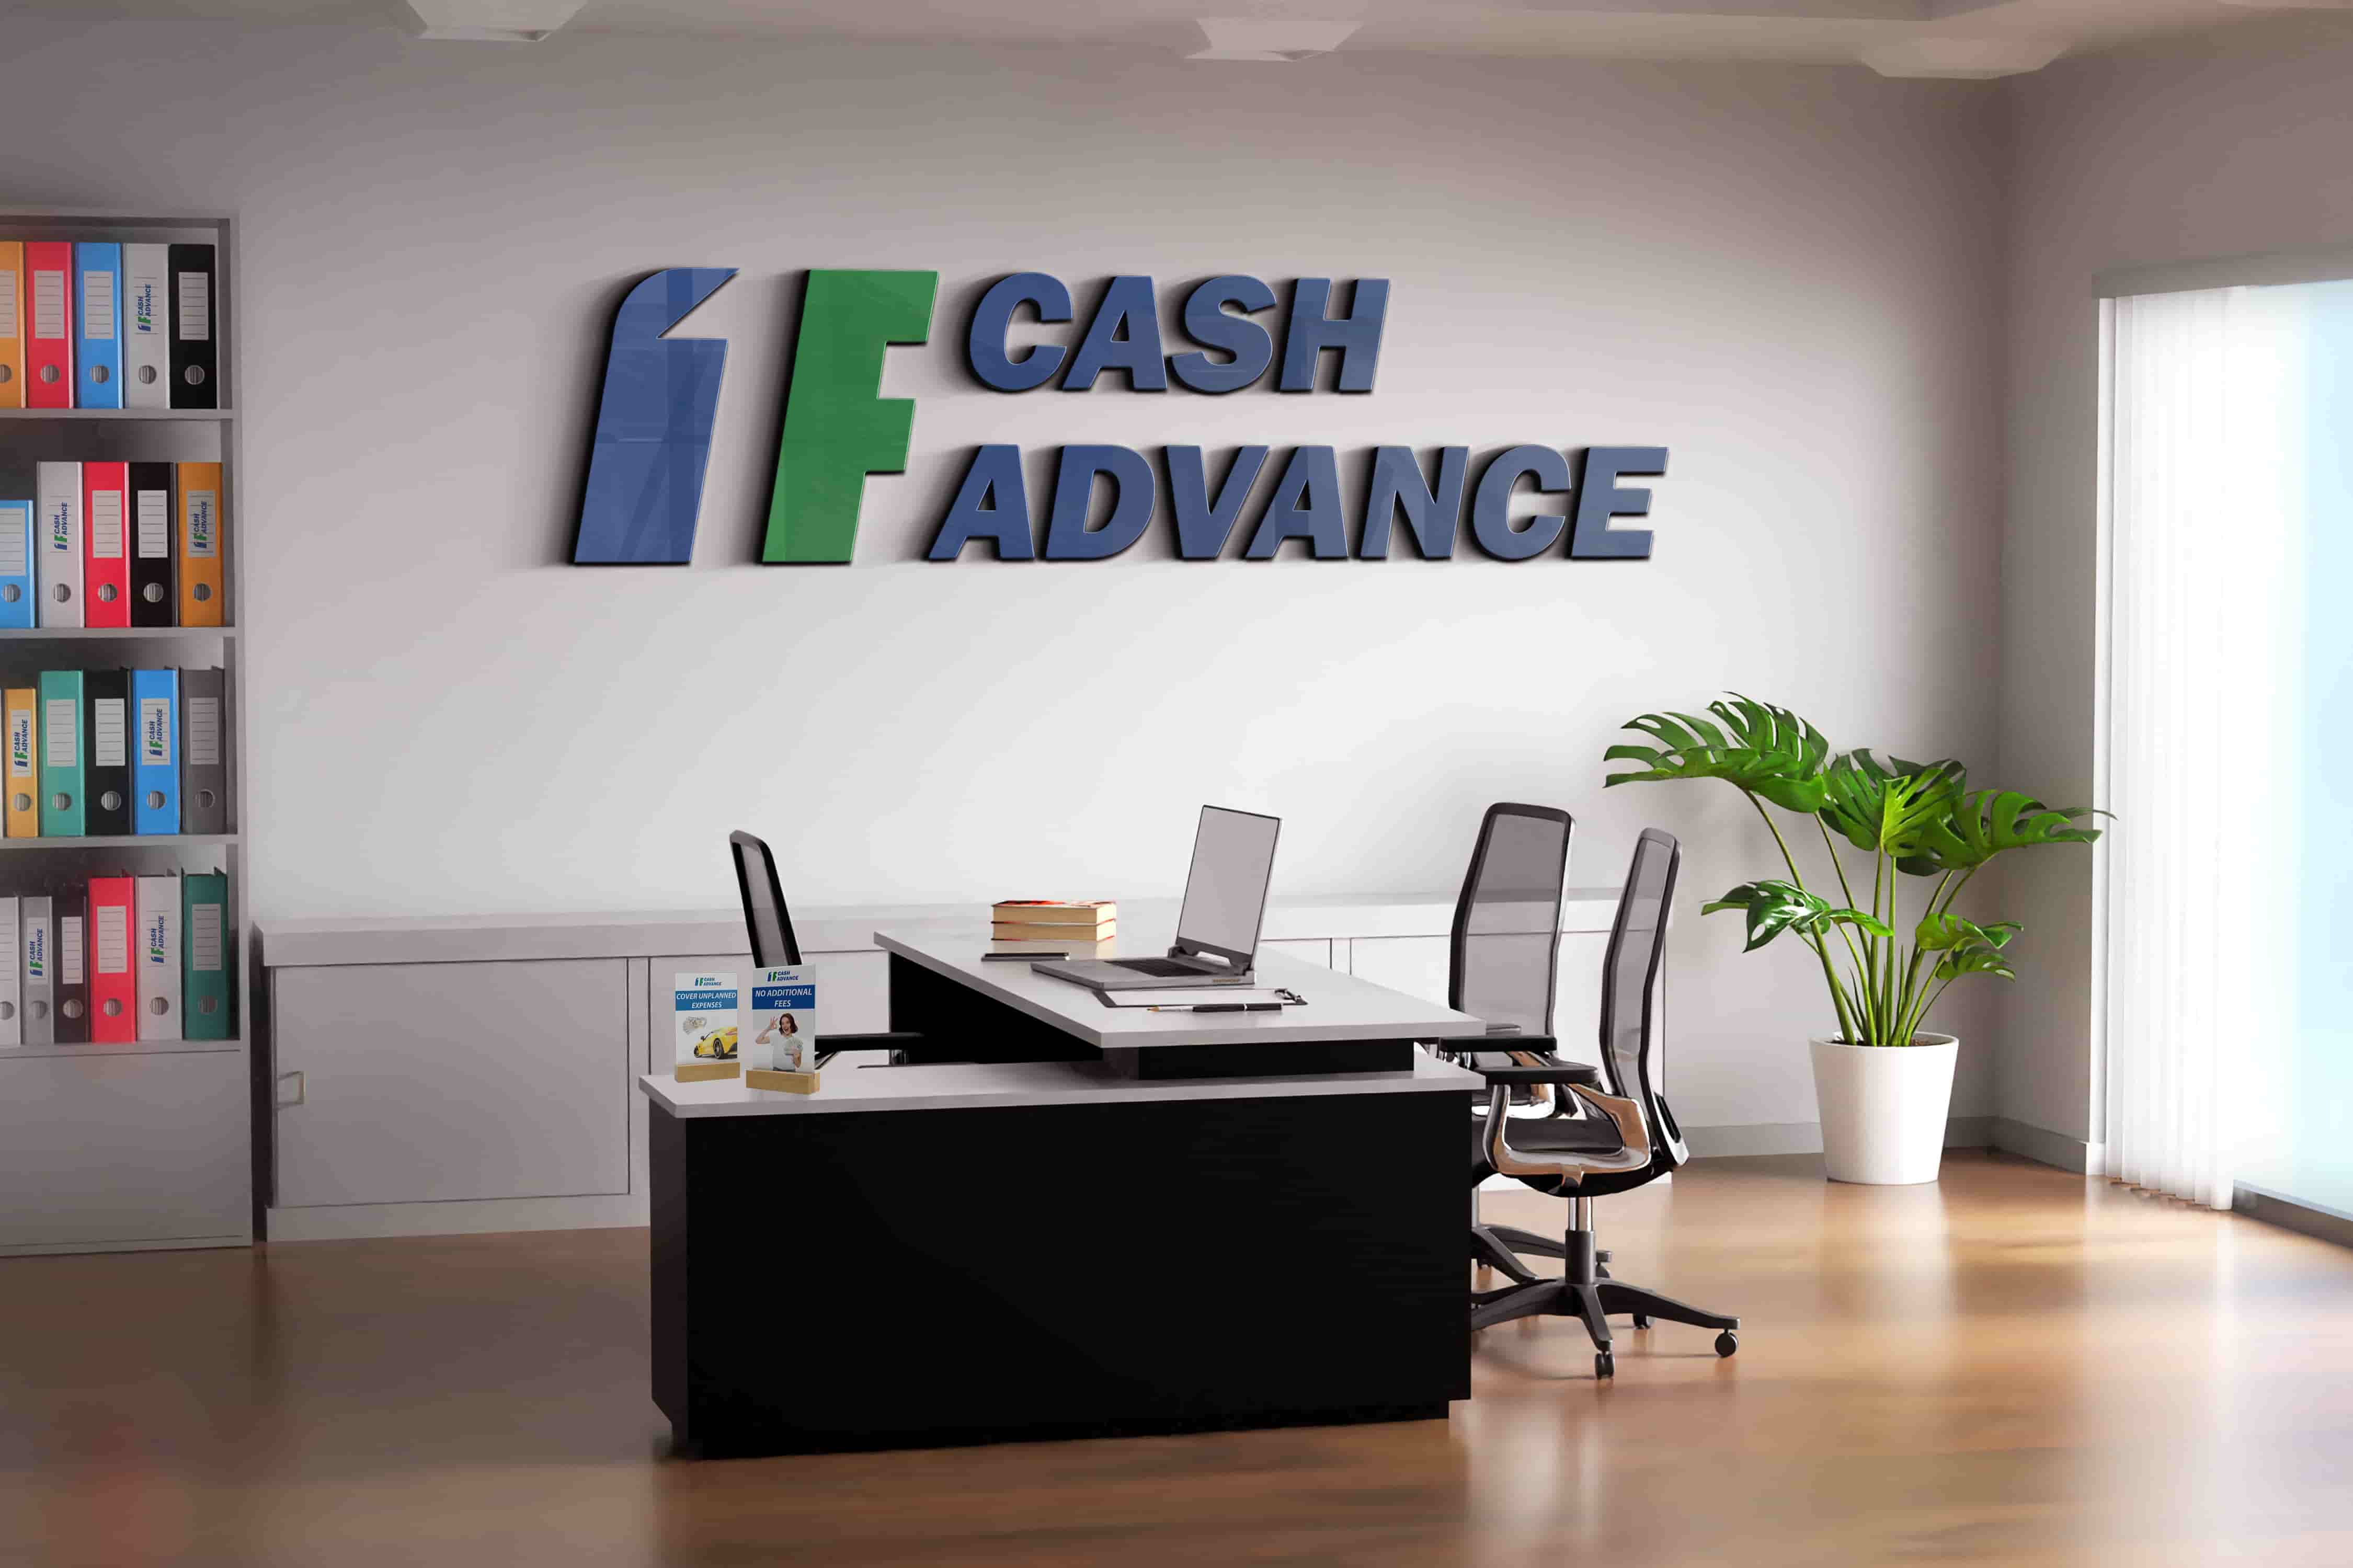 1F Cash Advance payday loans in Columbia, SC